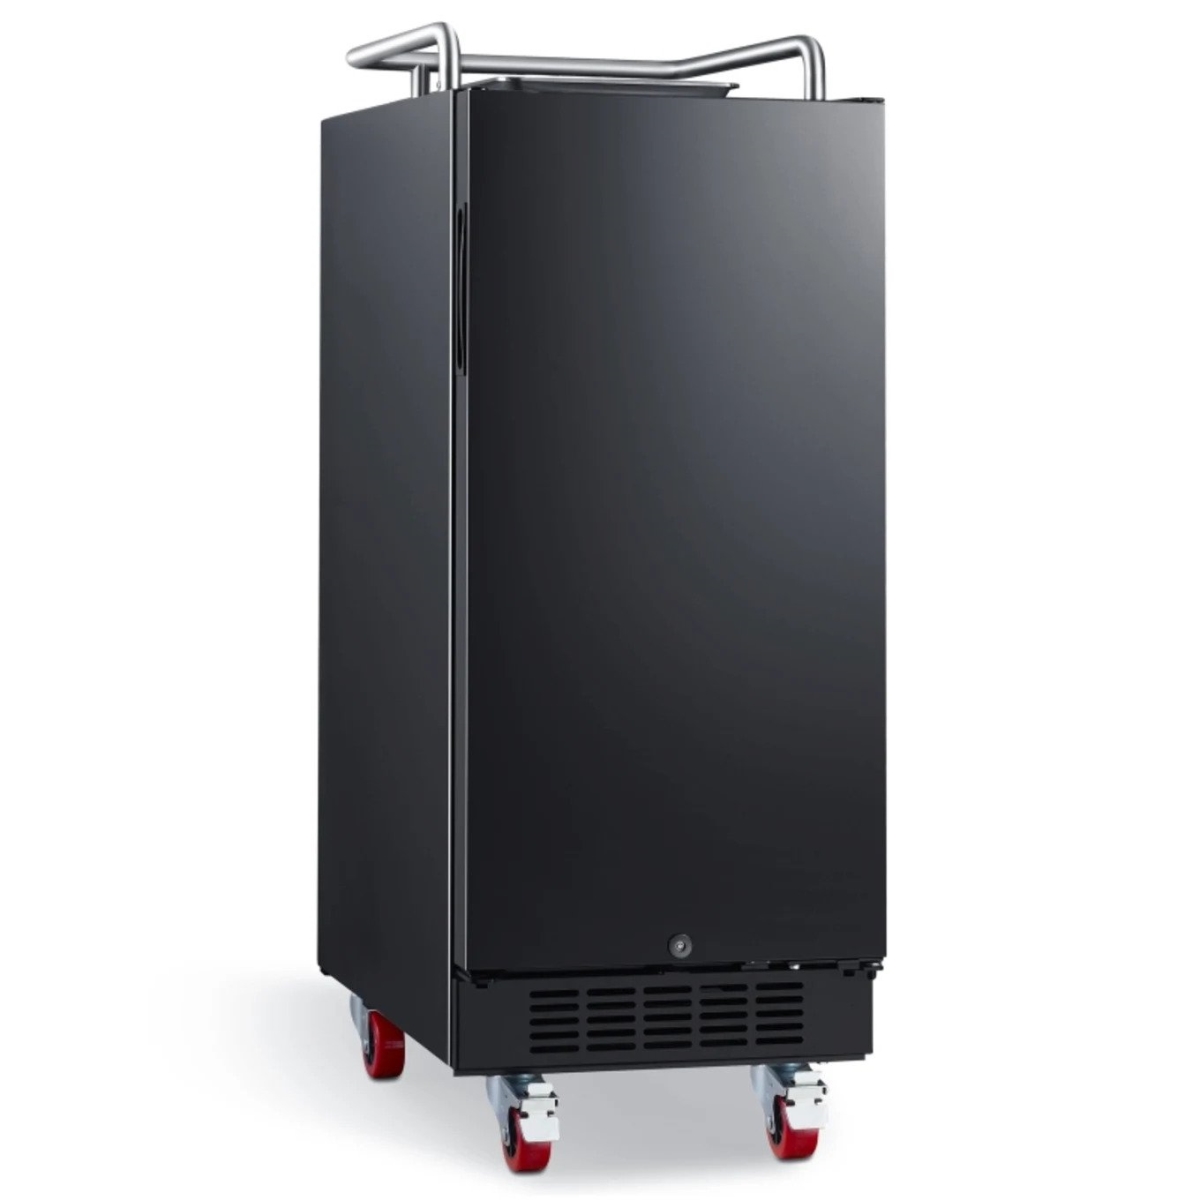 Picture of EdgeStar BR1500BL 15 in. Wide Kegerator Conversion Refrigerator with Forced Air Refrigeration, Black